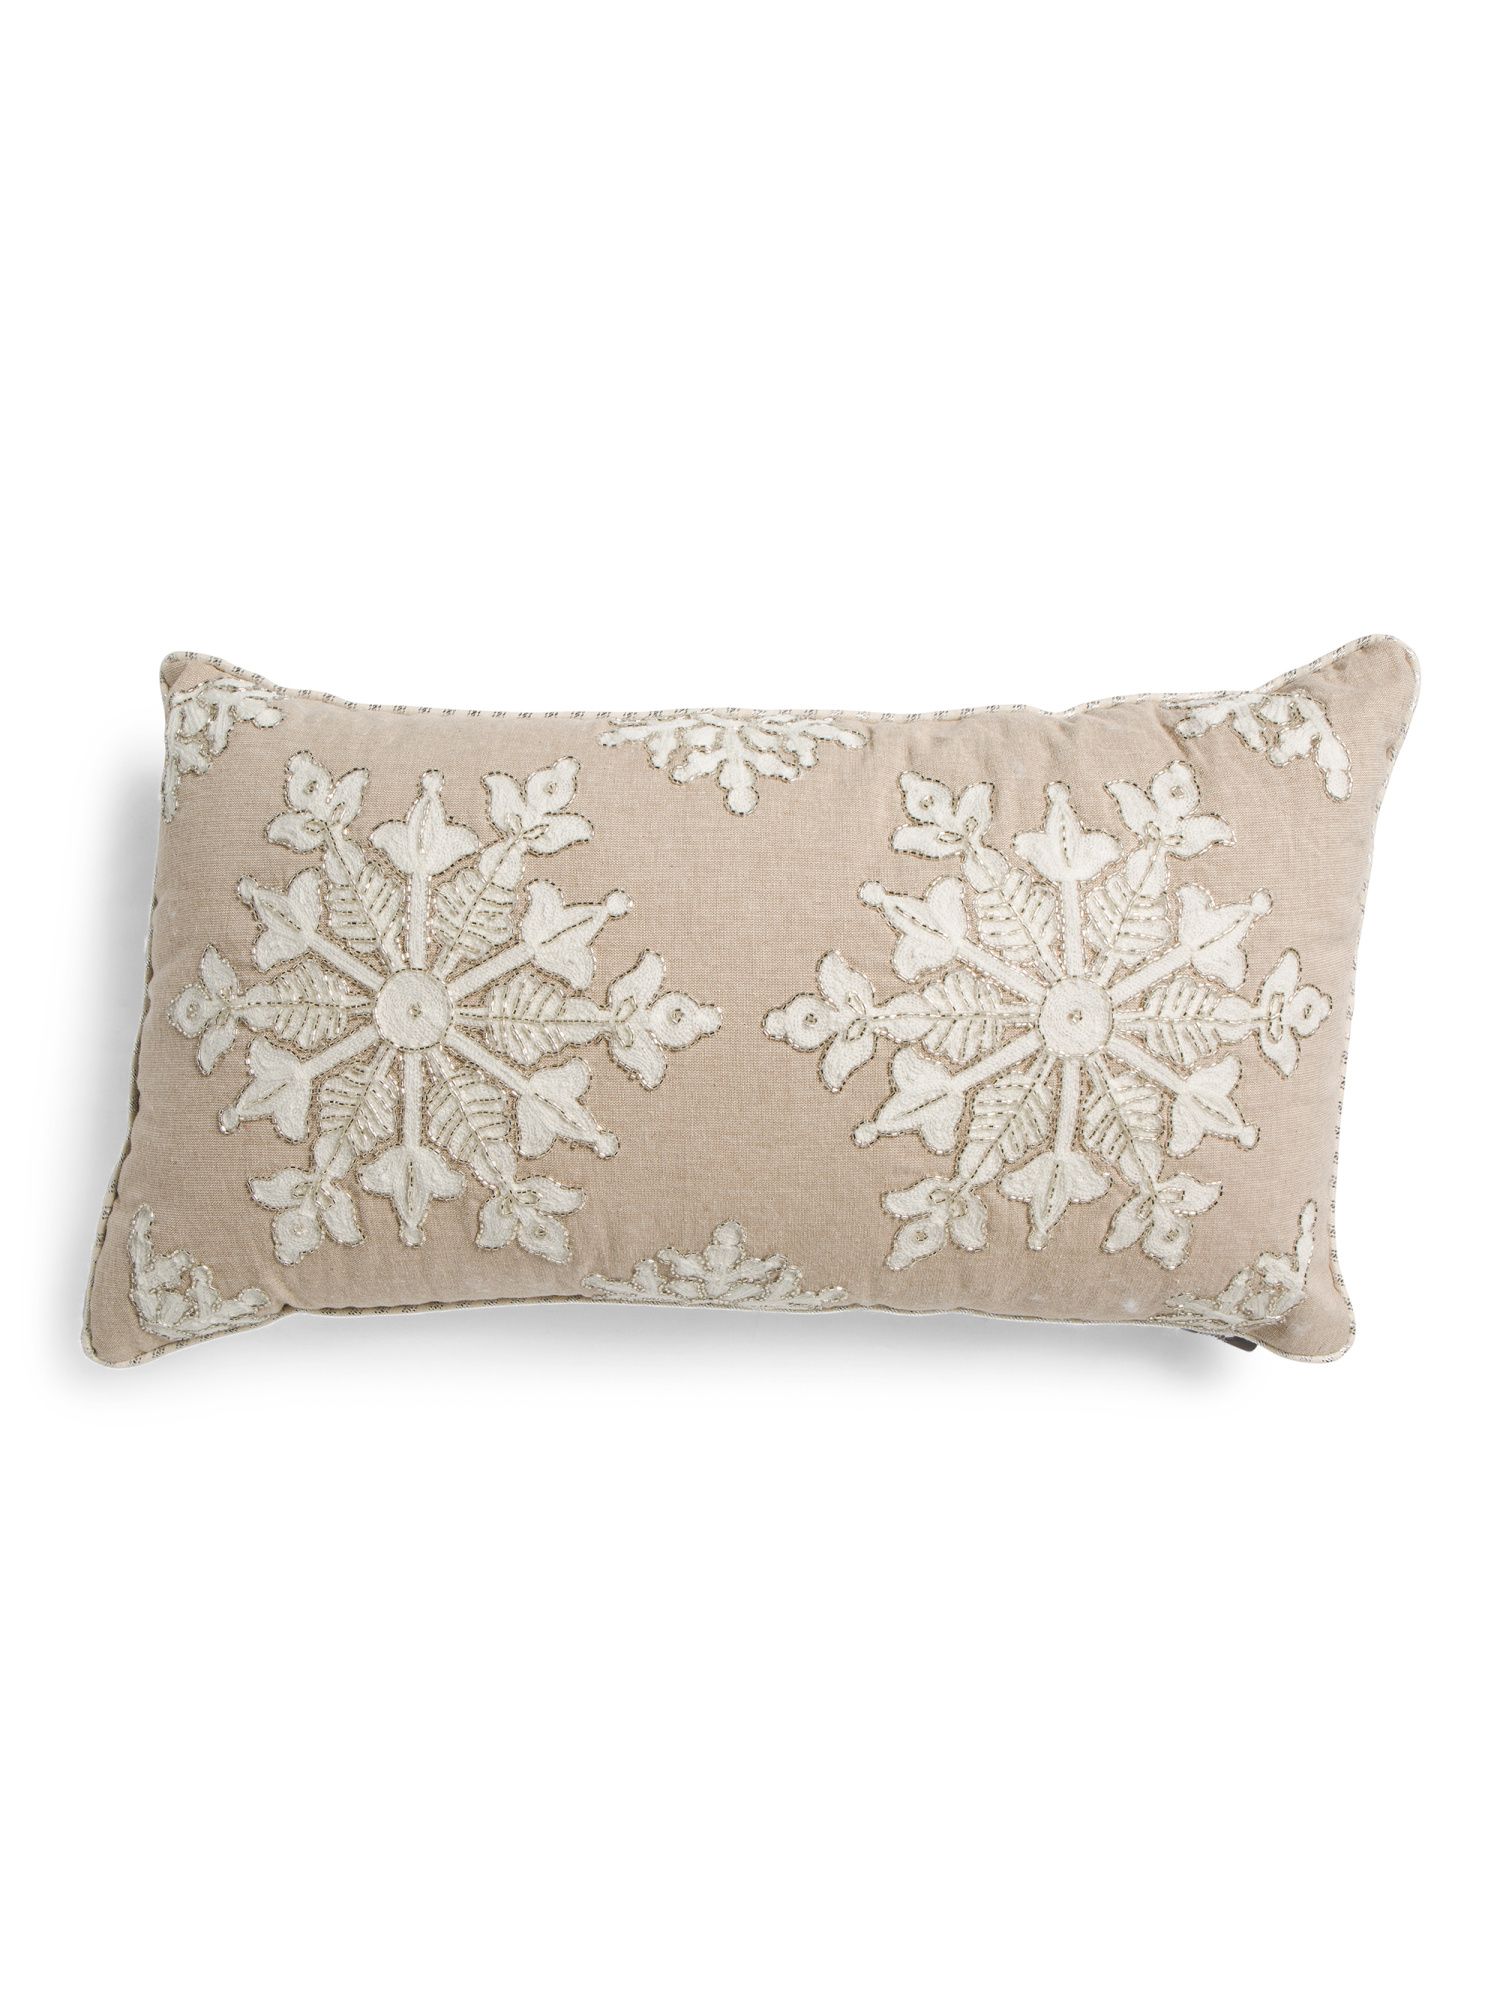 24x14 Embroidered And Beaded Pillow | TJ Maxx